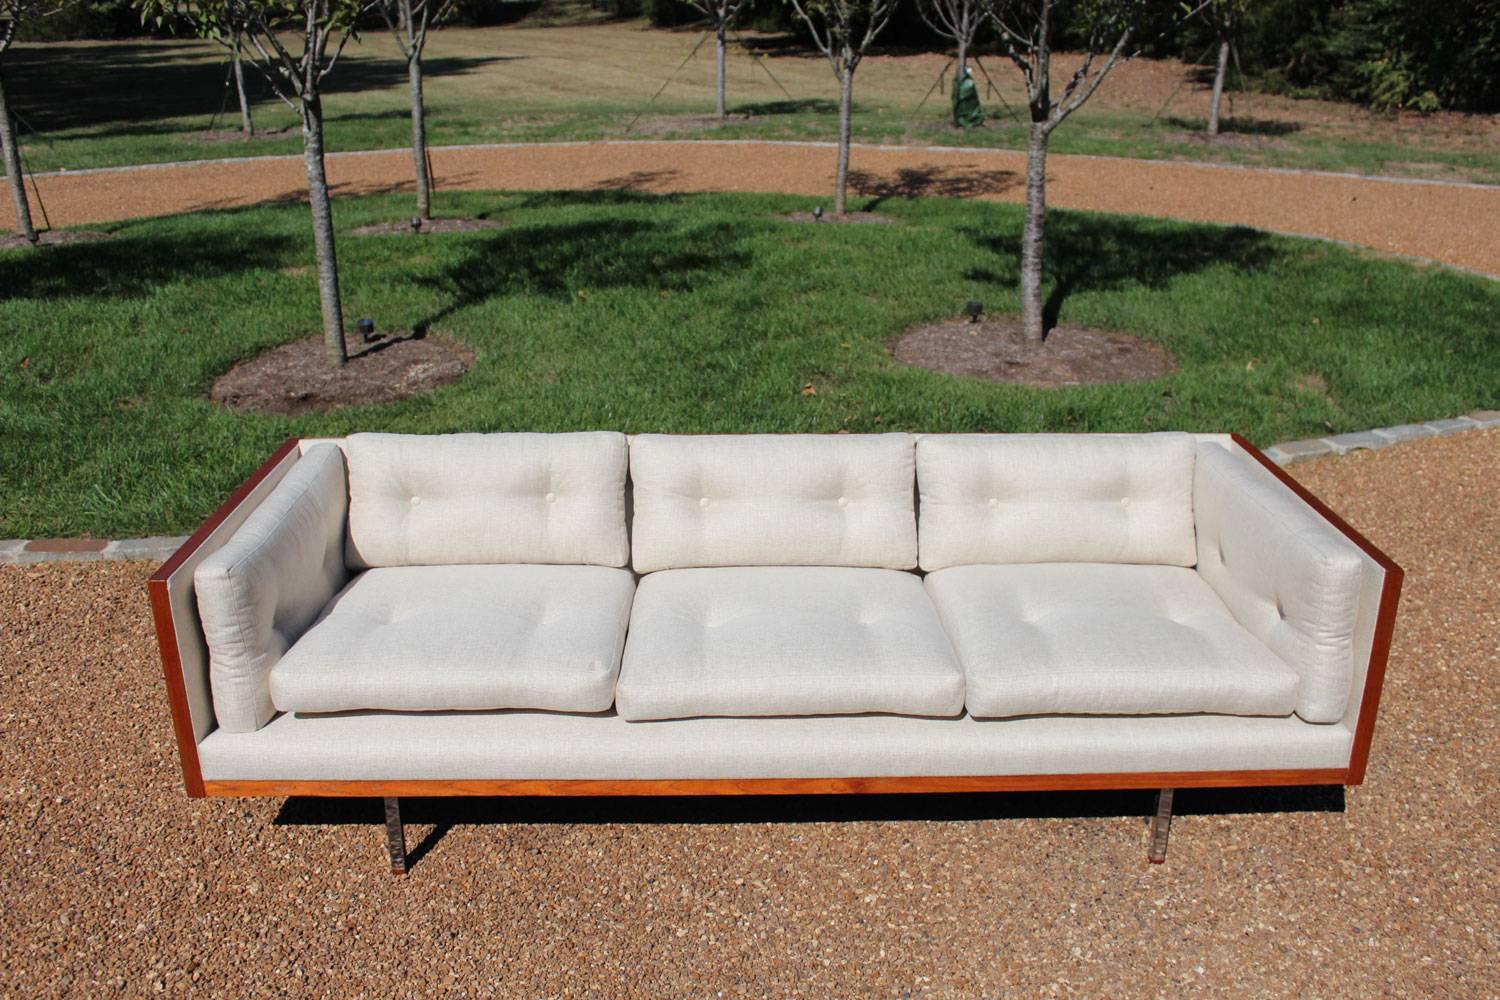 Rare three-sided teak wrapped sofa with stainless steel legs with wood caps by Komfort of Denmark. Professionally restored and reupholstered in a heavy weight high end polyester cotton blend modern oatmeal fabric color. Makers mark (Komfort) is on